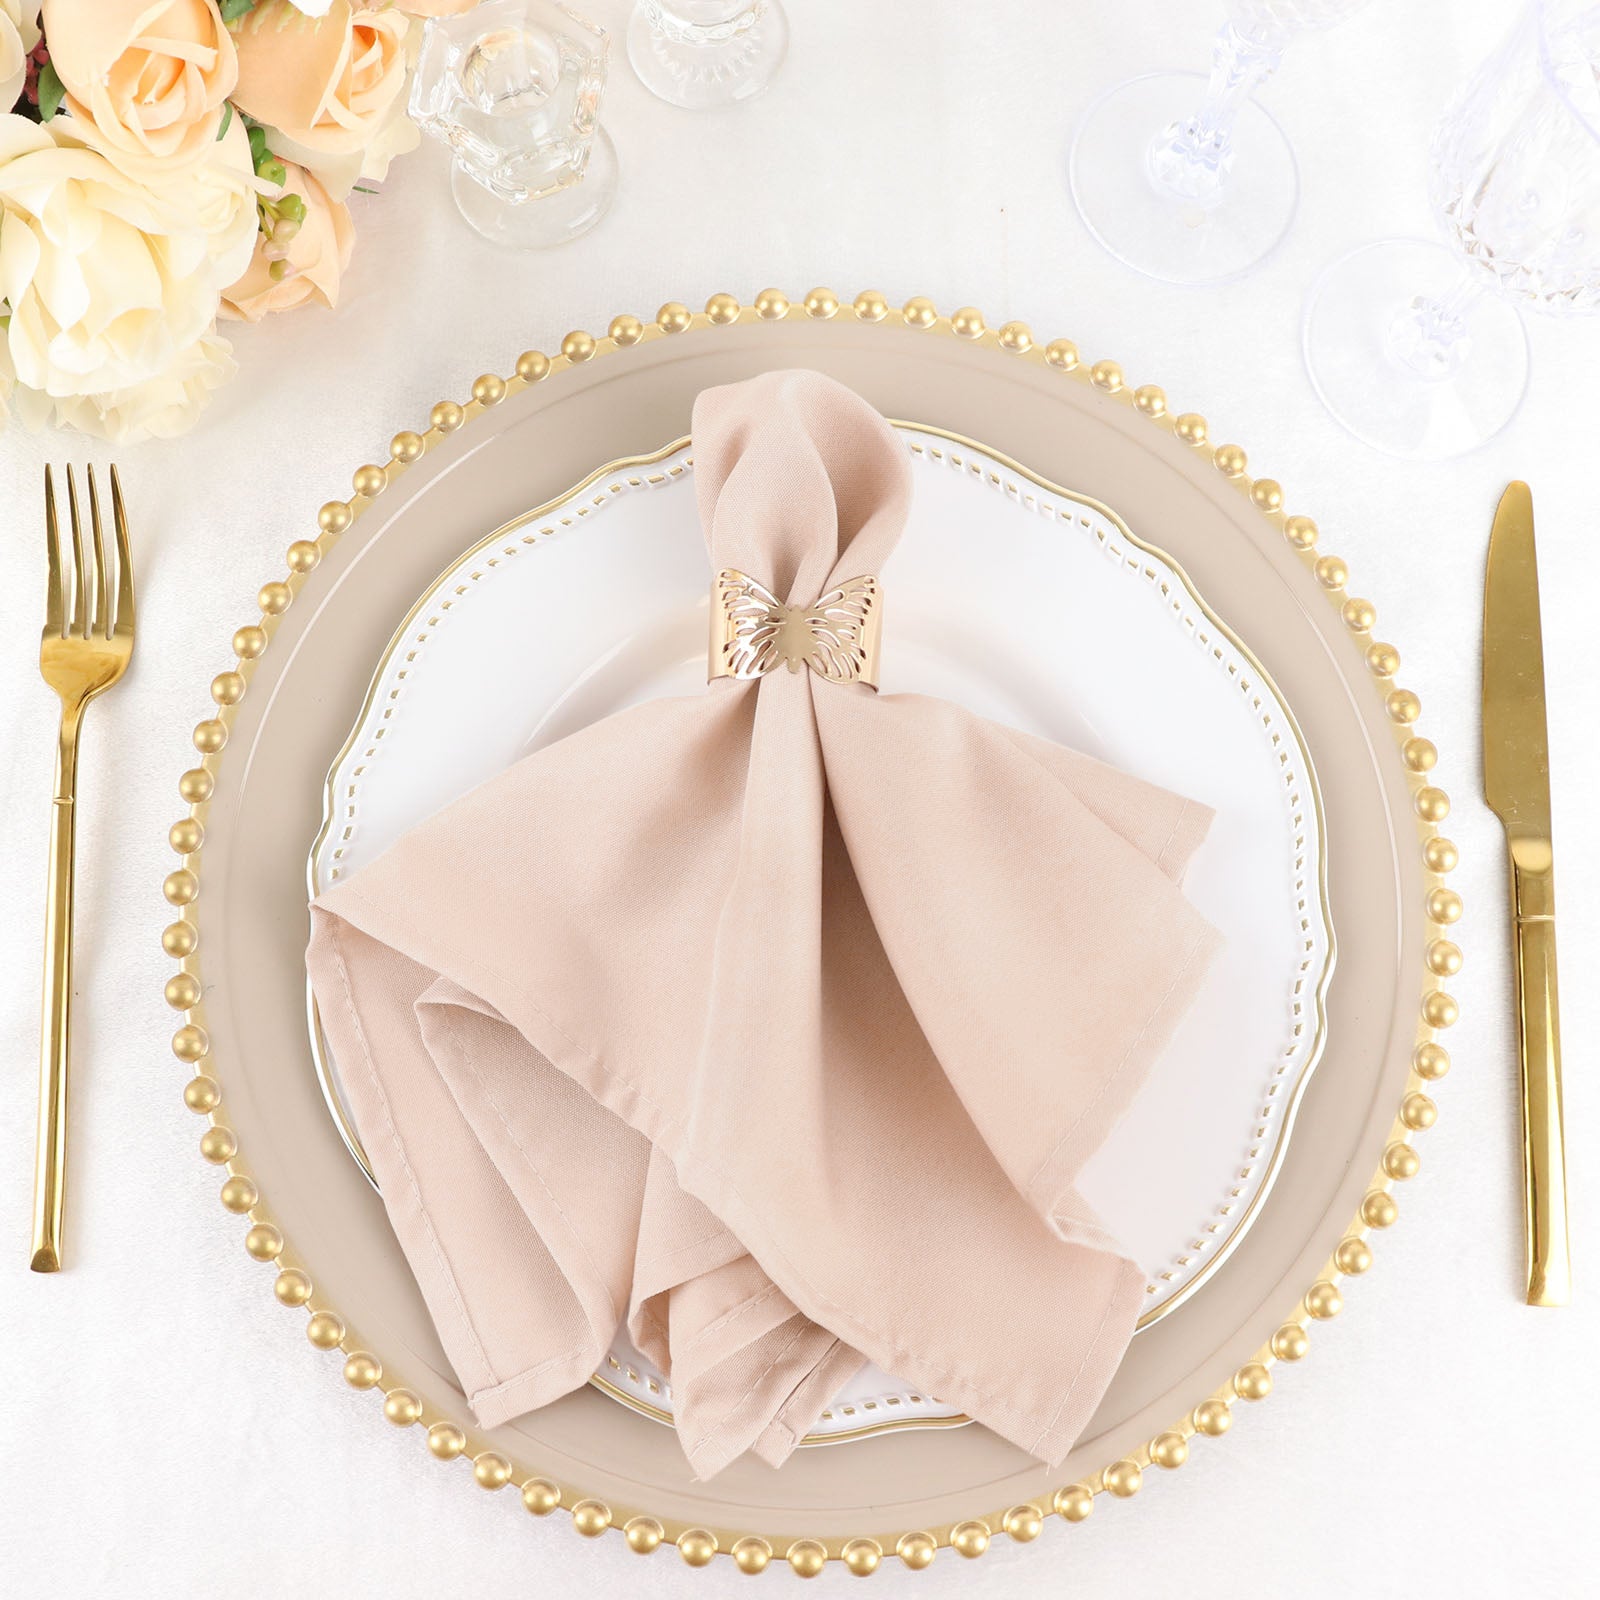 Efavormart Pack of 5 Premium 17 inch x 17 inch Washable Polyester Napkins Great for Wedding Party Restaurant Dinner Parties, Pink